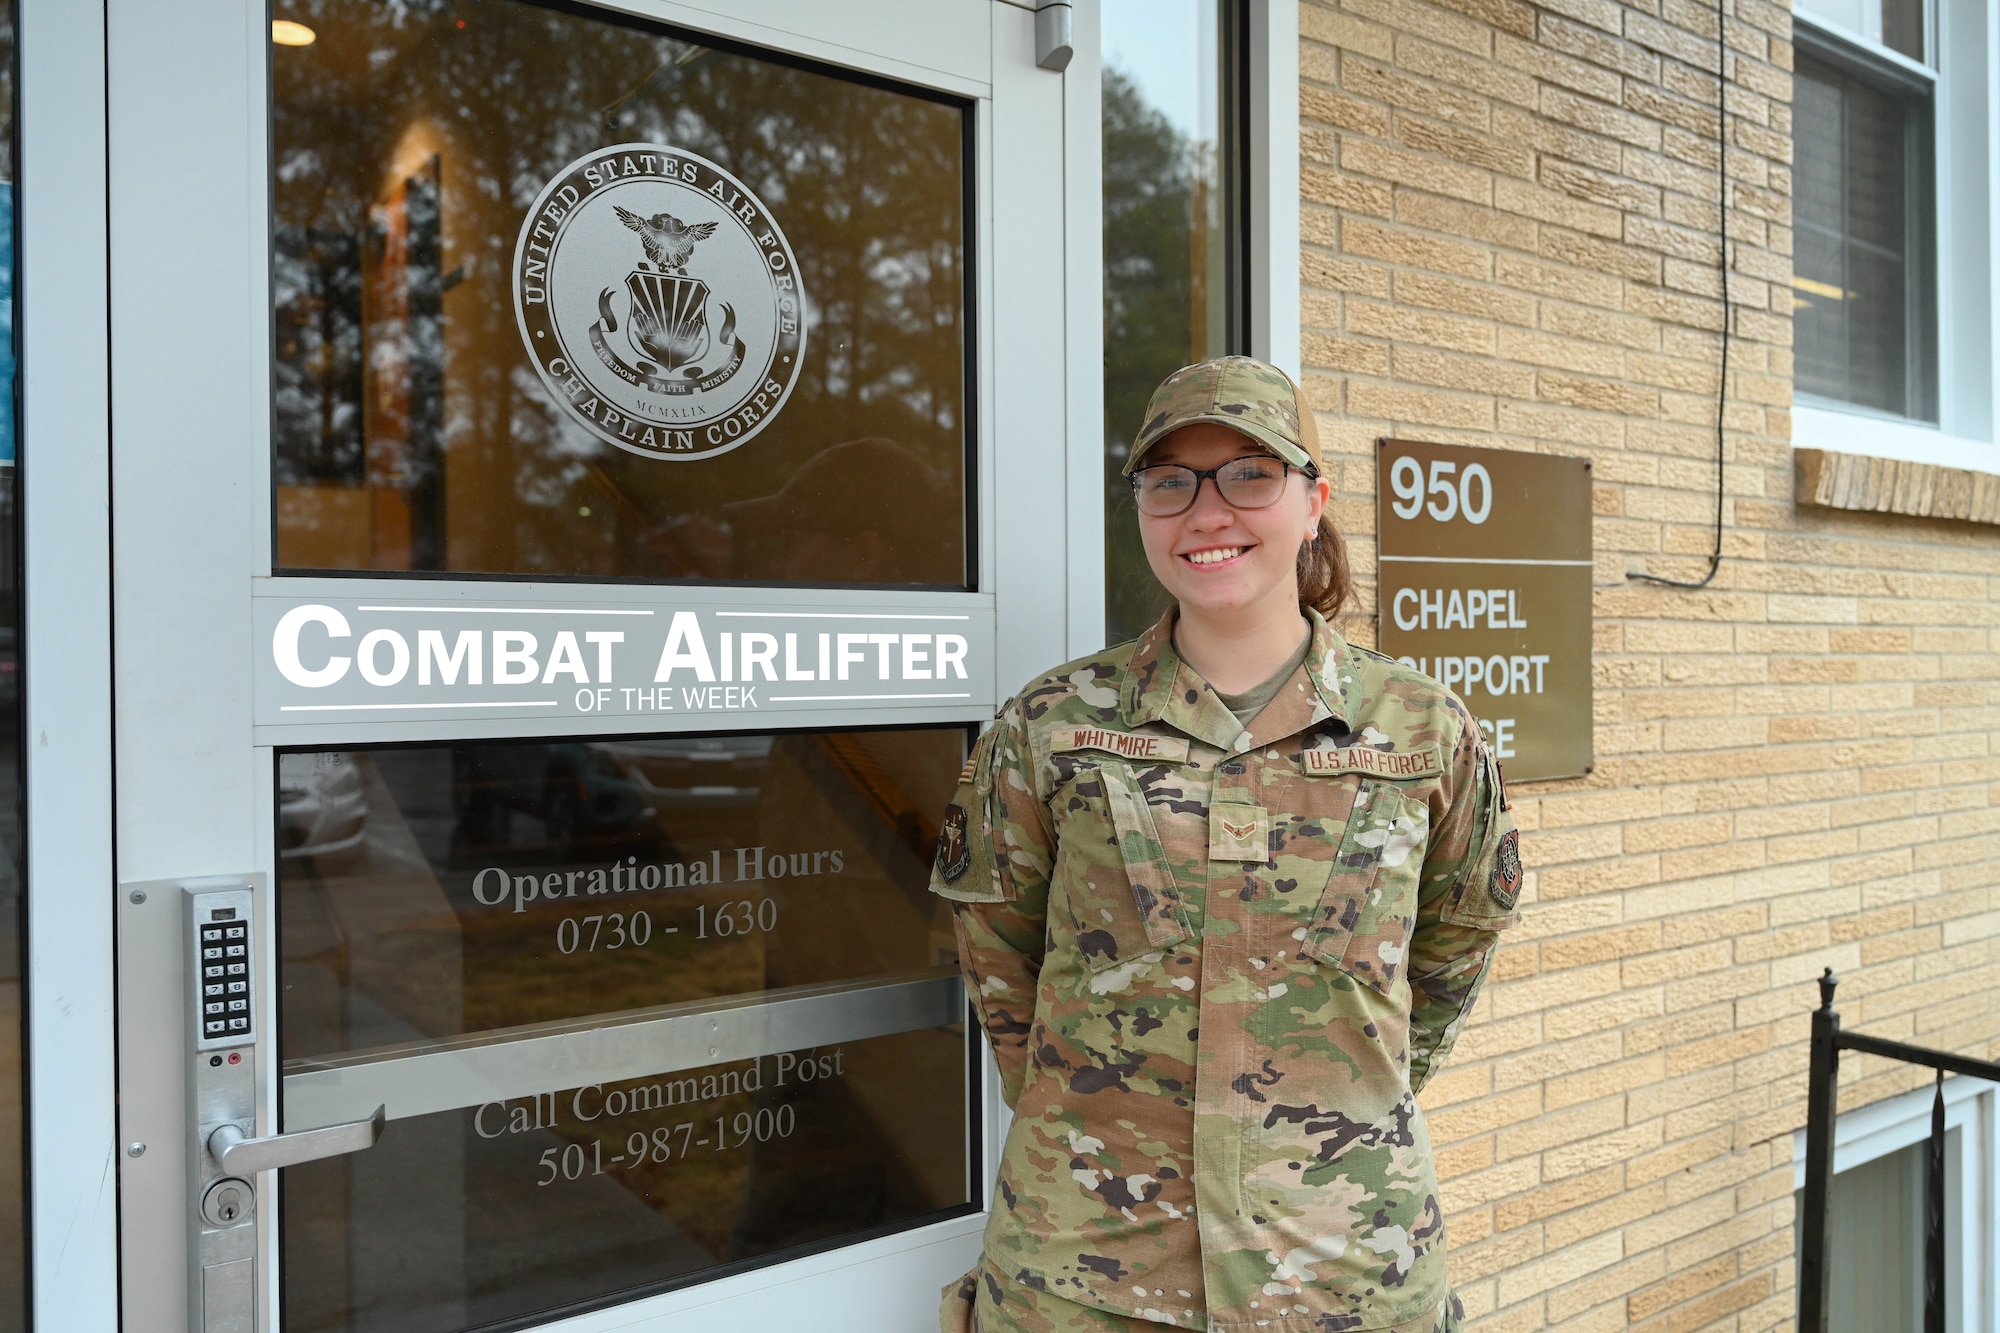 Airman 1st Class Kayla "Brooke" Whitmire, 19th Airlift Wing Chapel religious affairs apprentice, is selected as Combat Airlifter of the Week.